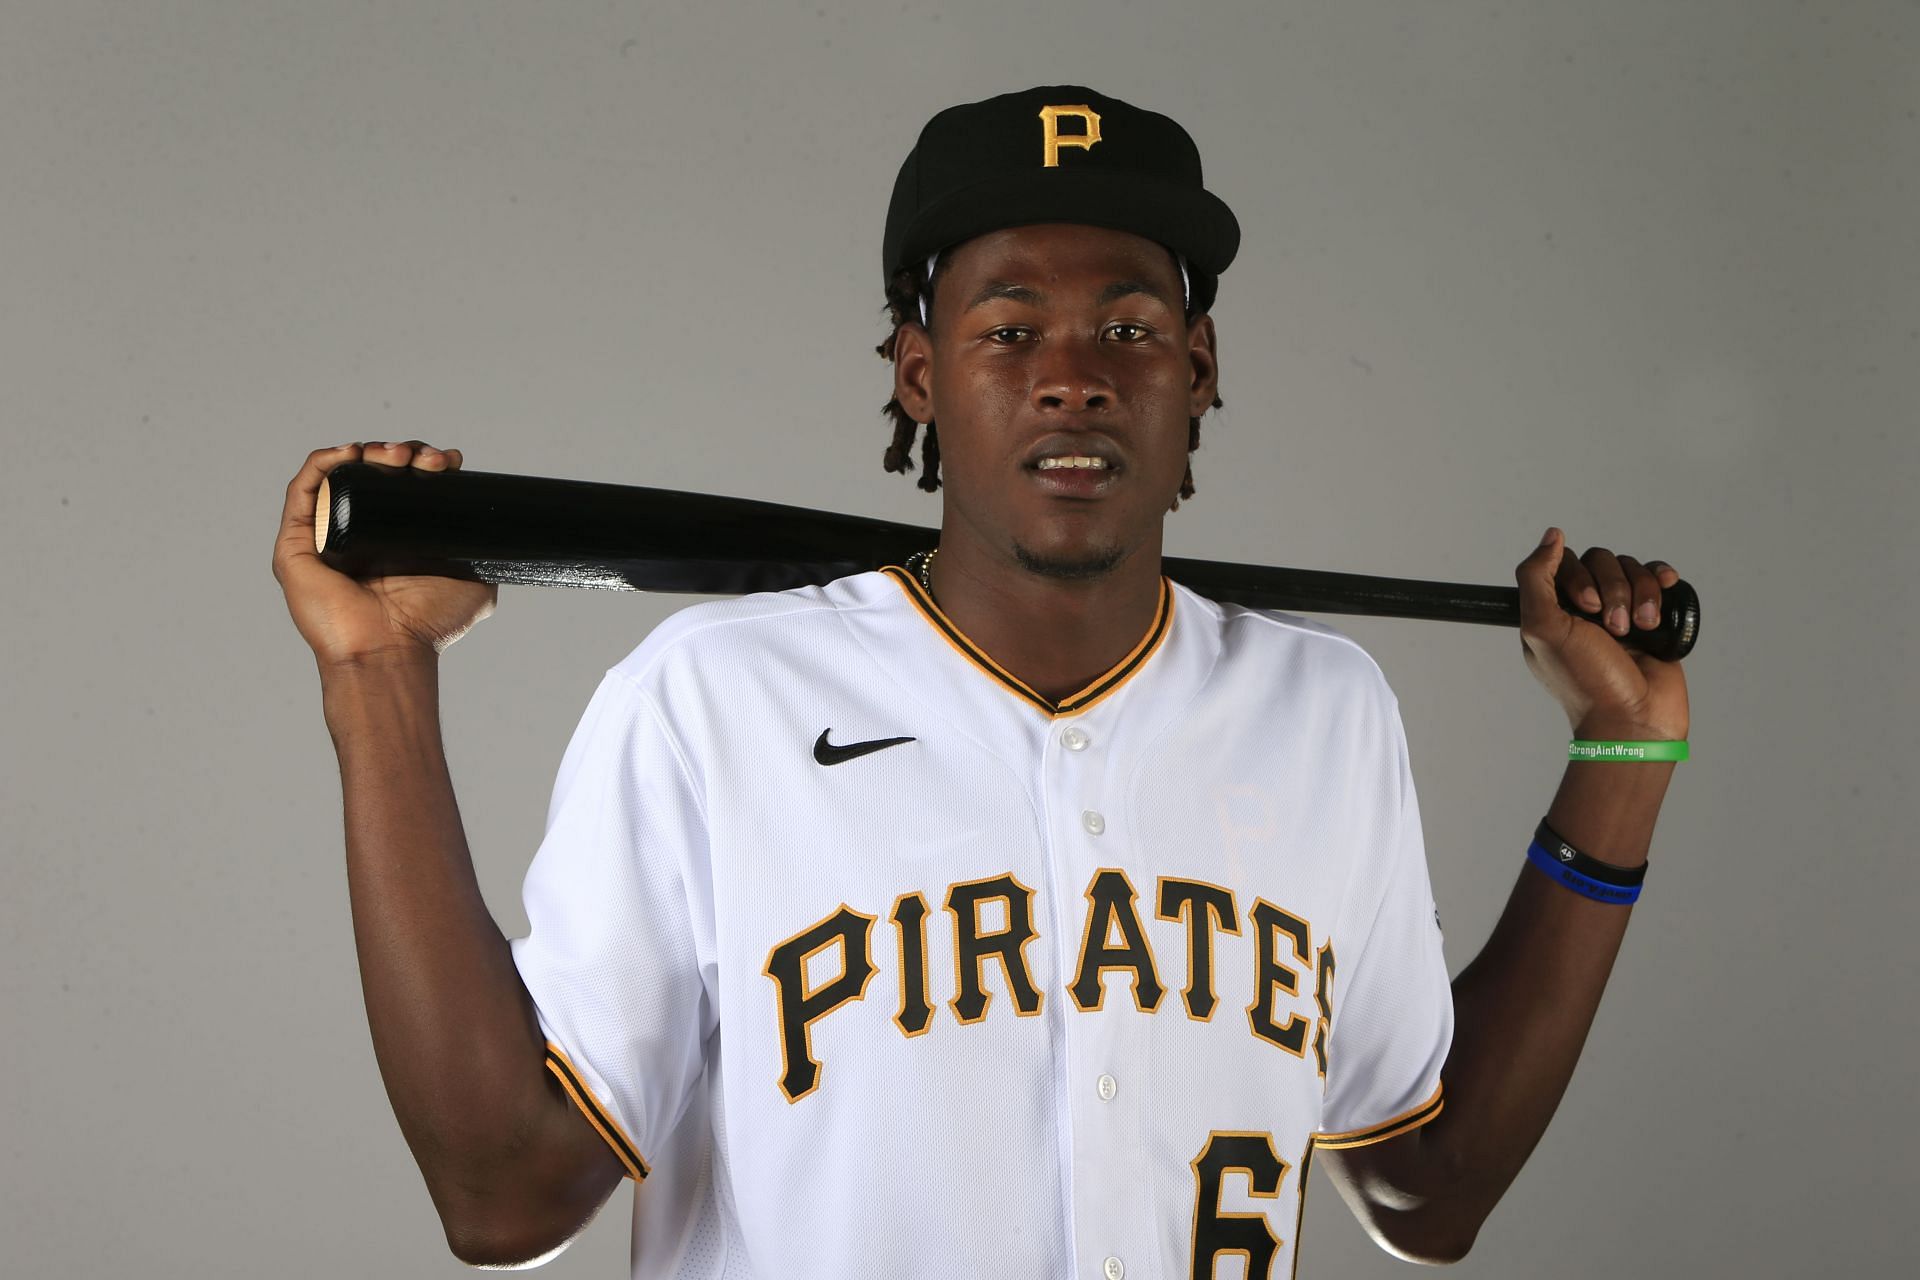 Oneil Cruz and the potential of the Pittsburgh Pirates